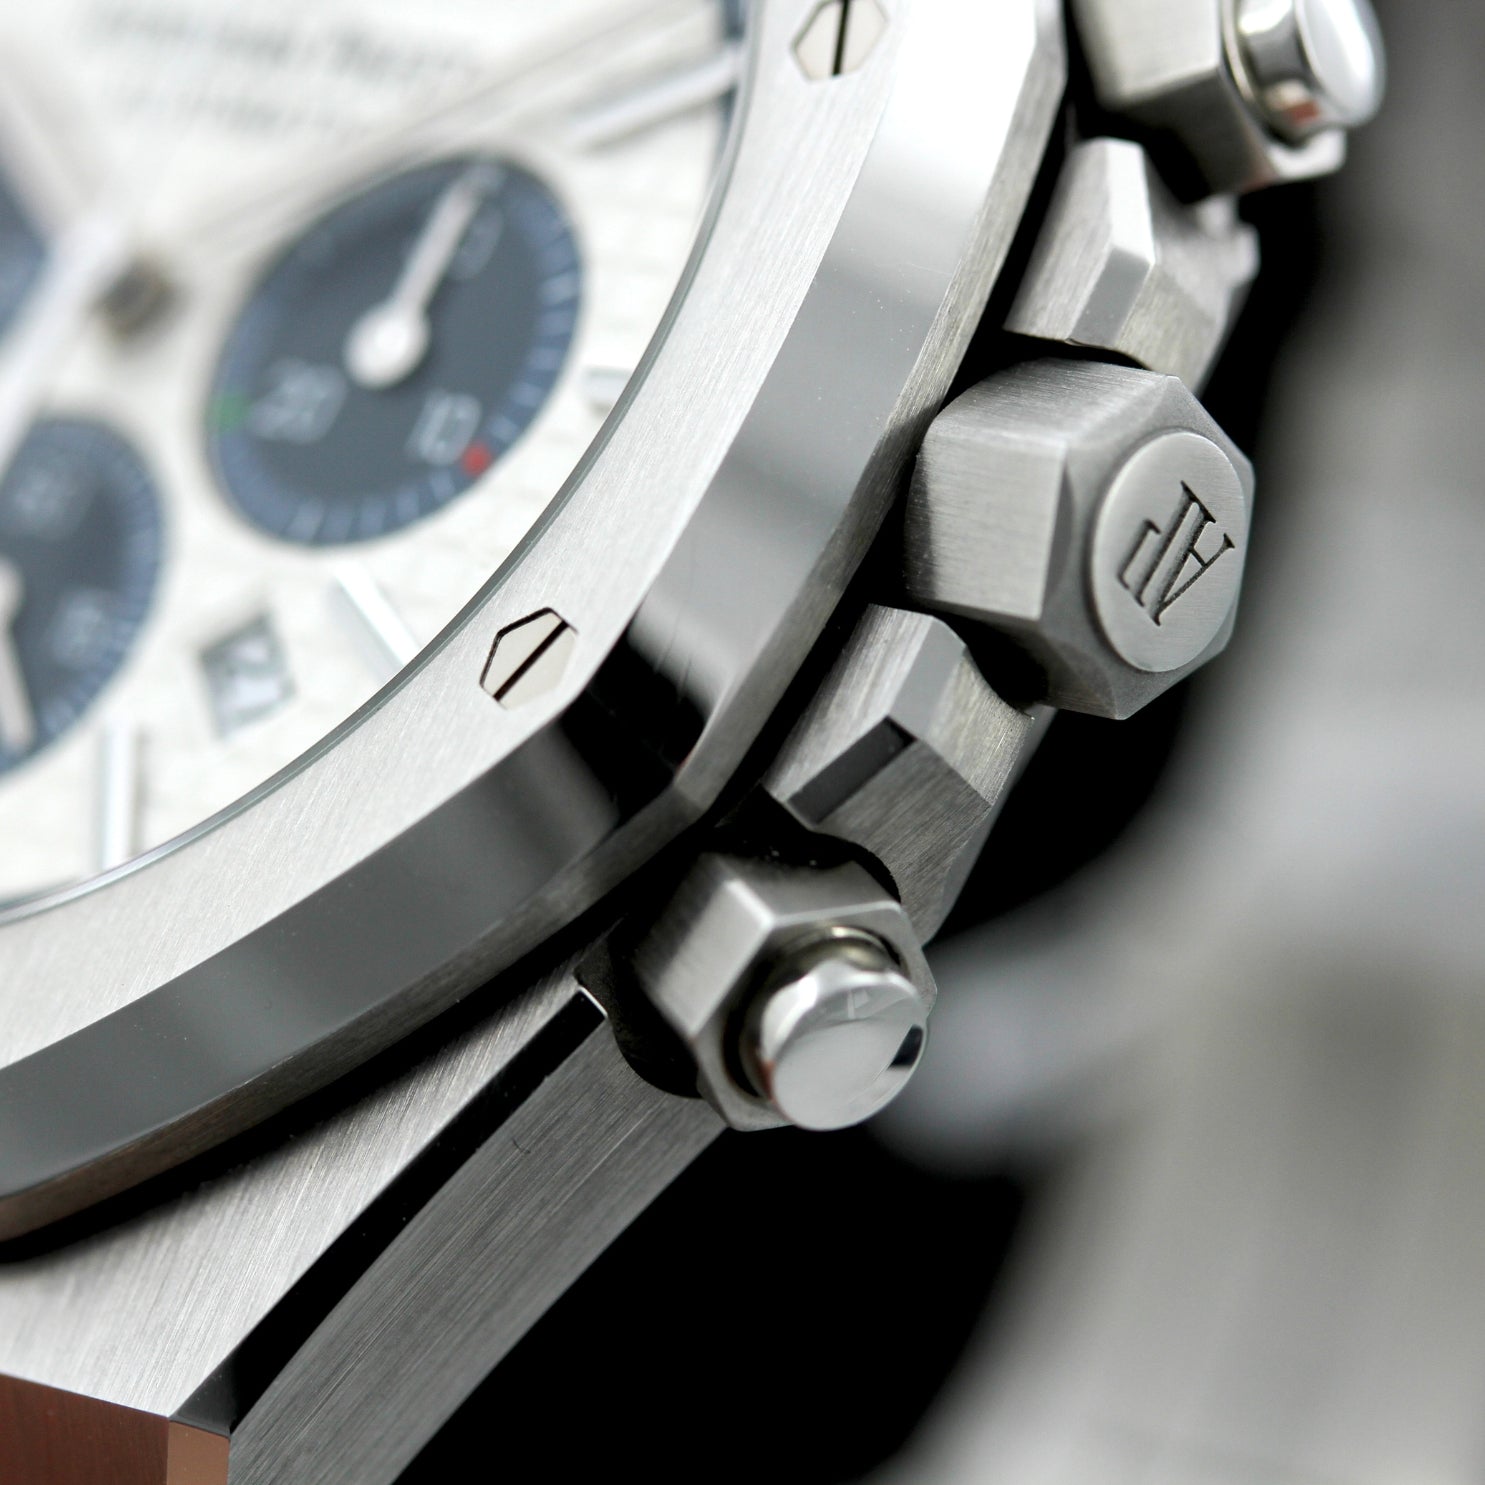 Audemars Piguet Royal Oak Chronograph 41mm, Tribute to Italy, Limited Editon 500 pc., Ref. 26326ST.OO.D027CA.01, 2016, B+P - LUXUHRIA